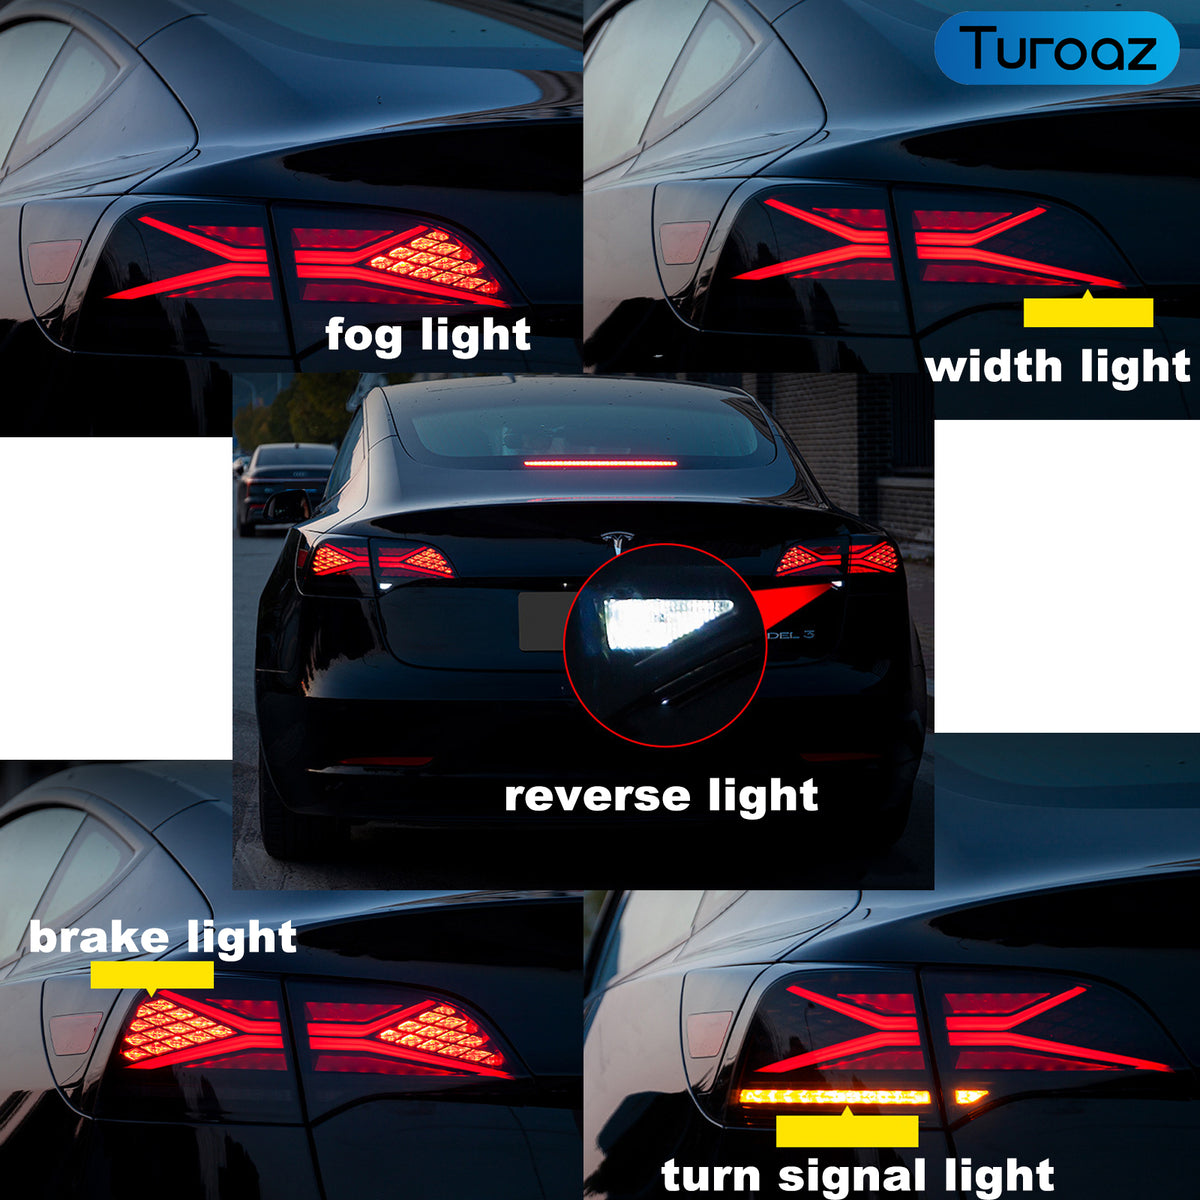 Turoaz LED Tail Light Assembly for Tesla Model 3 Y 2021+, Streamlined LED Sequential Turn Lights with Dynamic Startup Back Rear Lamps, Reverse Lights Accessories (x-type)